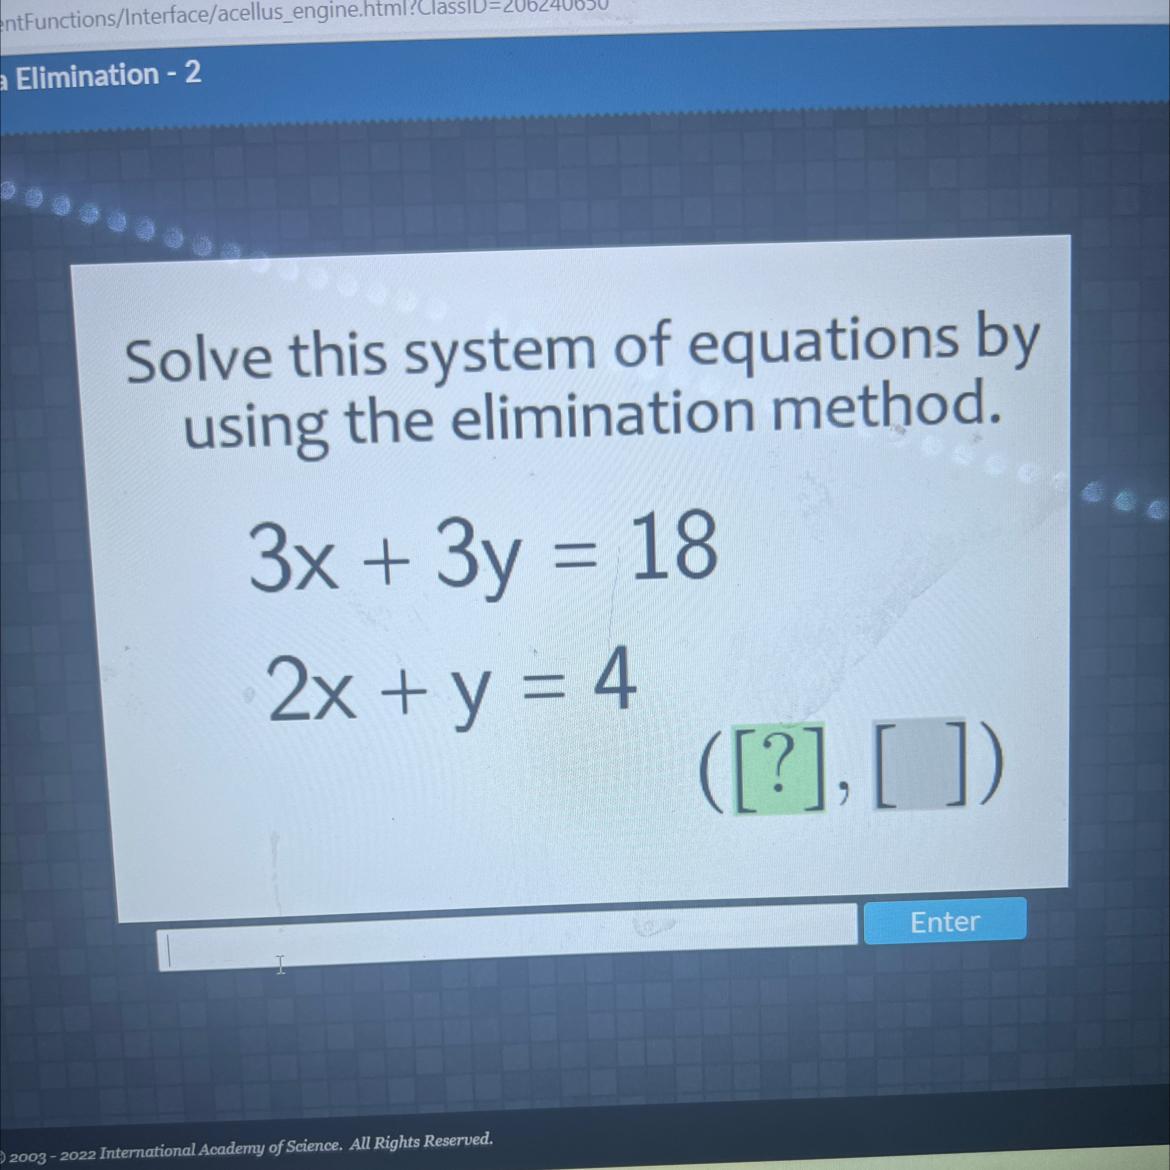 Solve This System Of Equations Byusing The Elimination Method.3x + 3y = 182x + Y = 4( [?]. []).